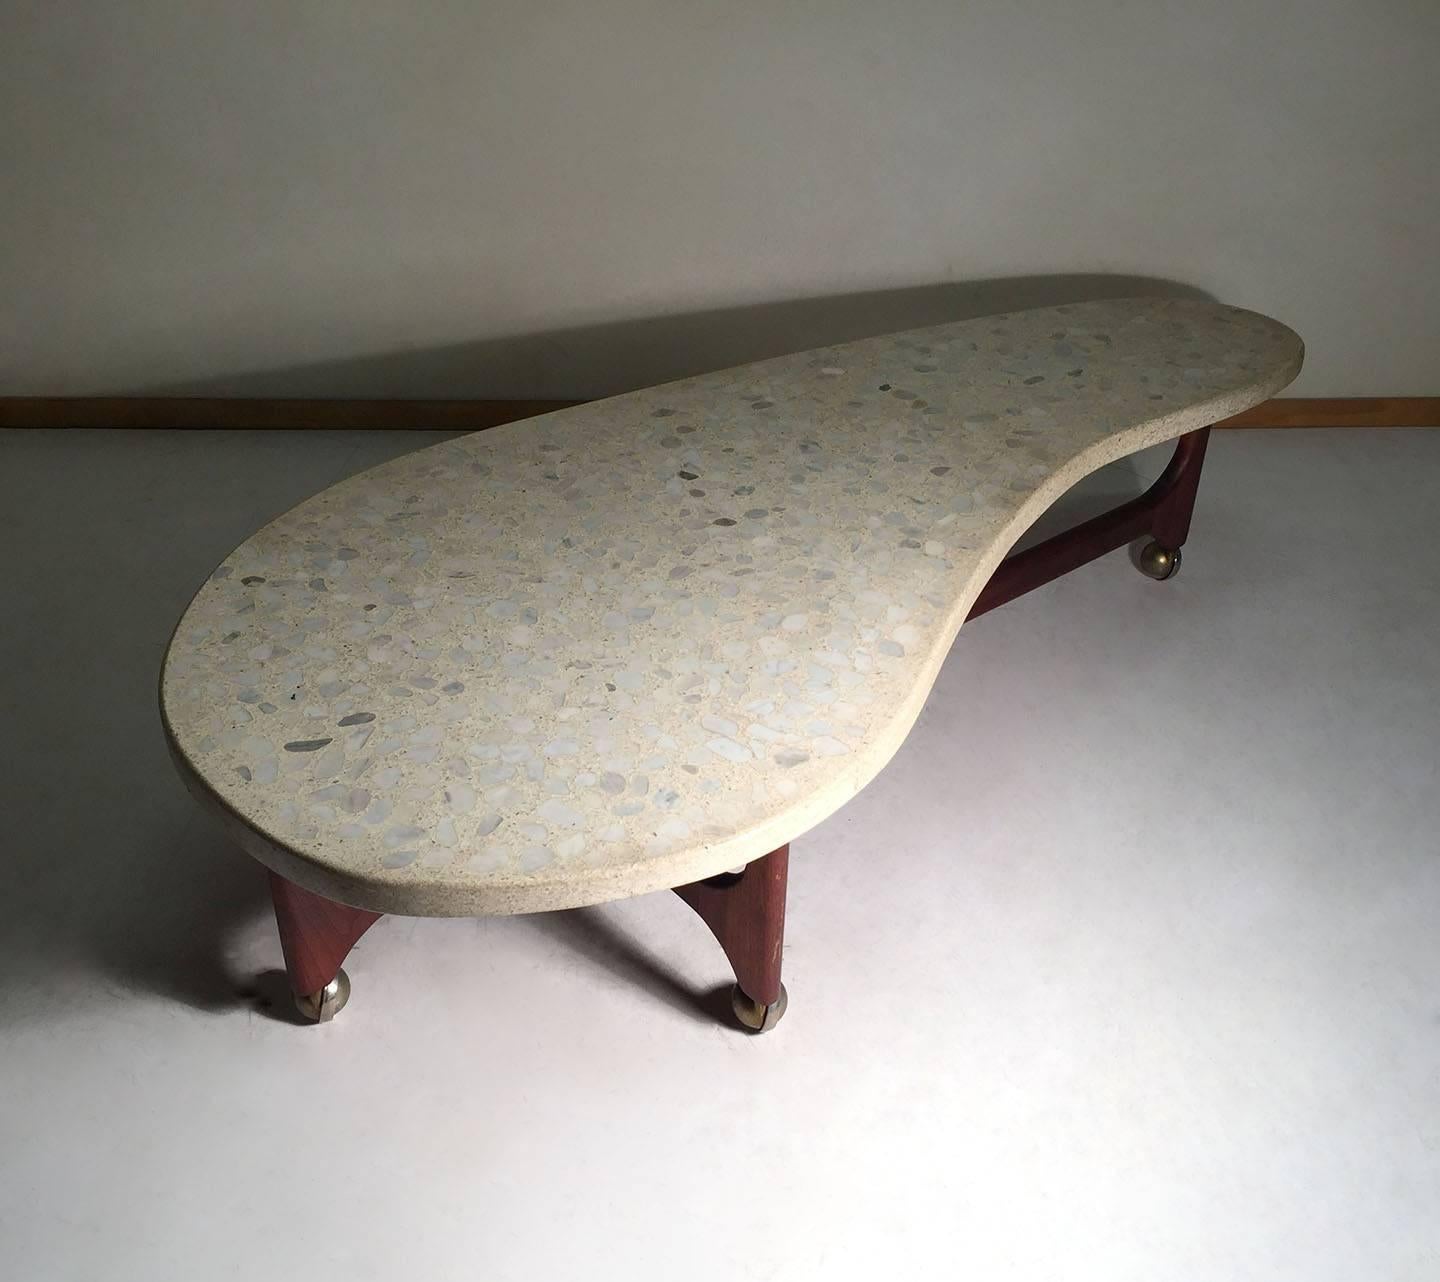 Rare cloud form Terrazzo coffee table on sculpted walnut base on castors. No identifying labels, however most dealers attribute this furniture line of work to Harvey Probber. Of the same period and style of Adrian Pearsall. More pics to come.